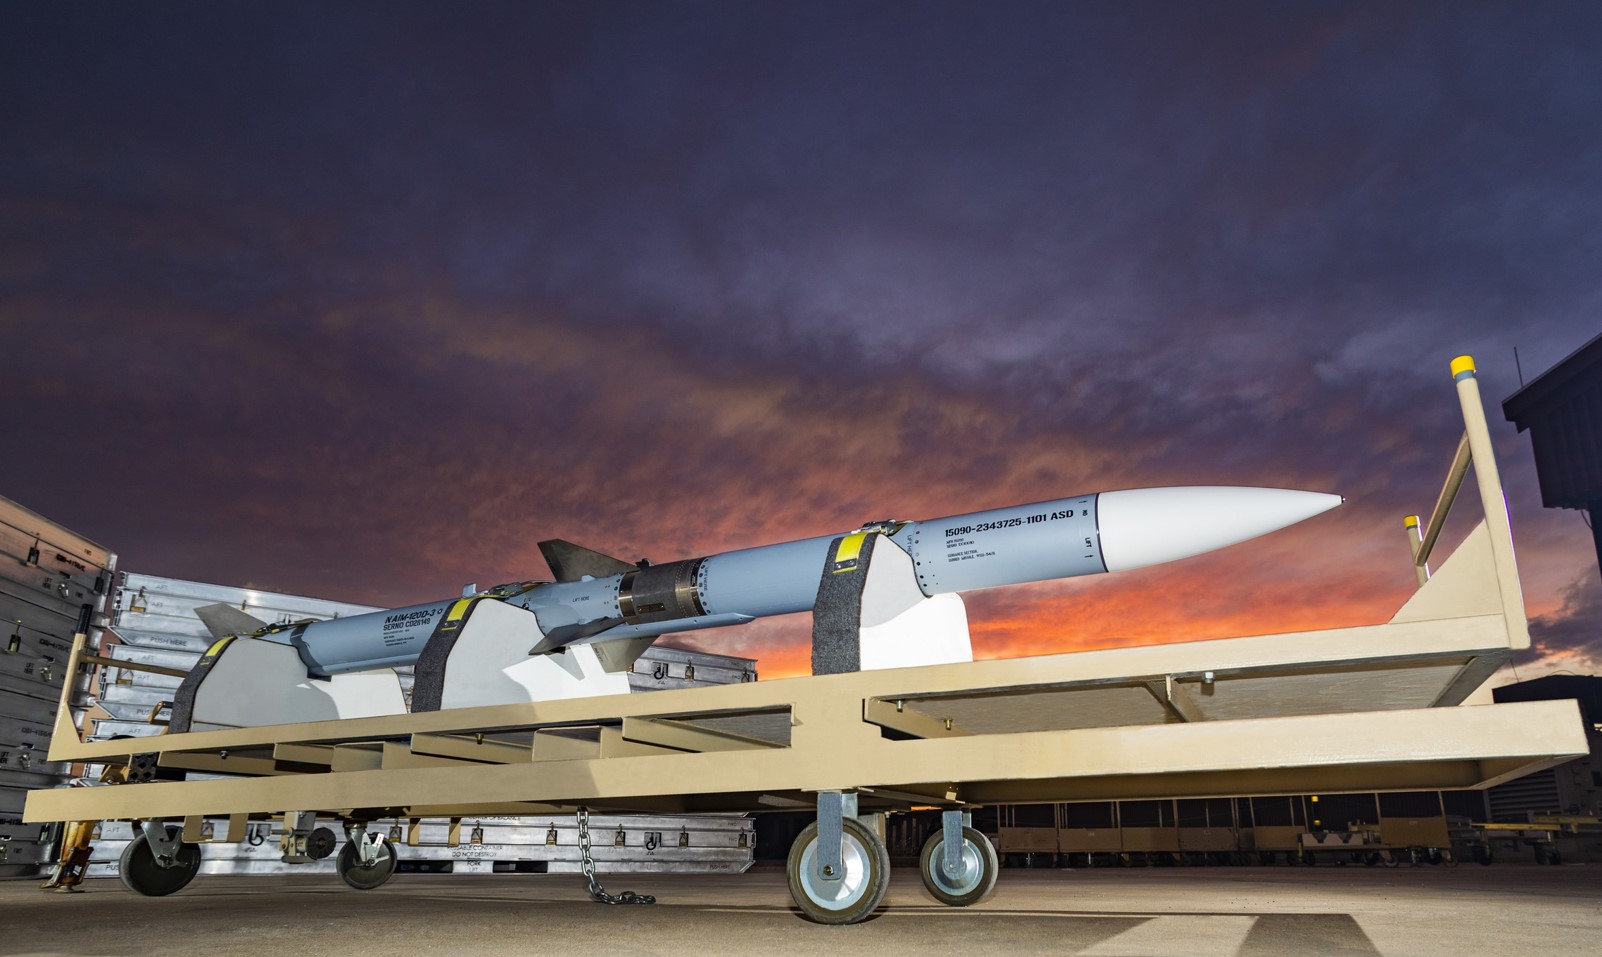 Raytheon received nearly $1 billion to produce upgraded AMRAAM missiles for the U.S. and 19 allies